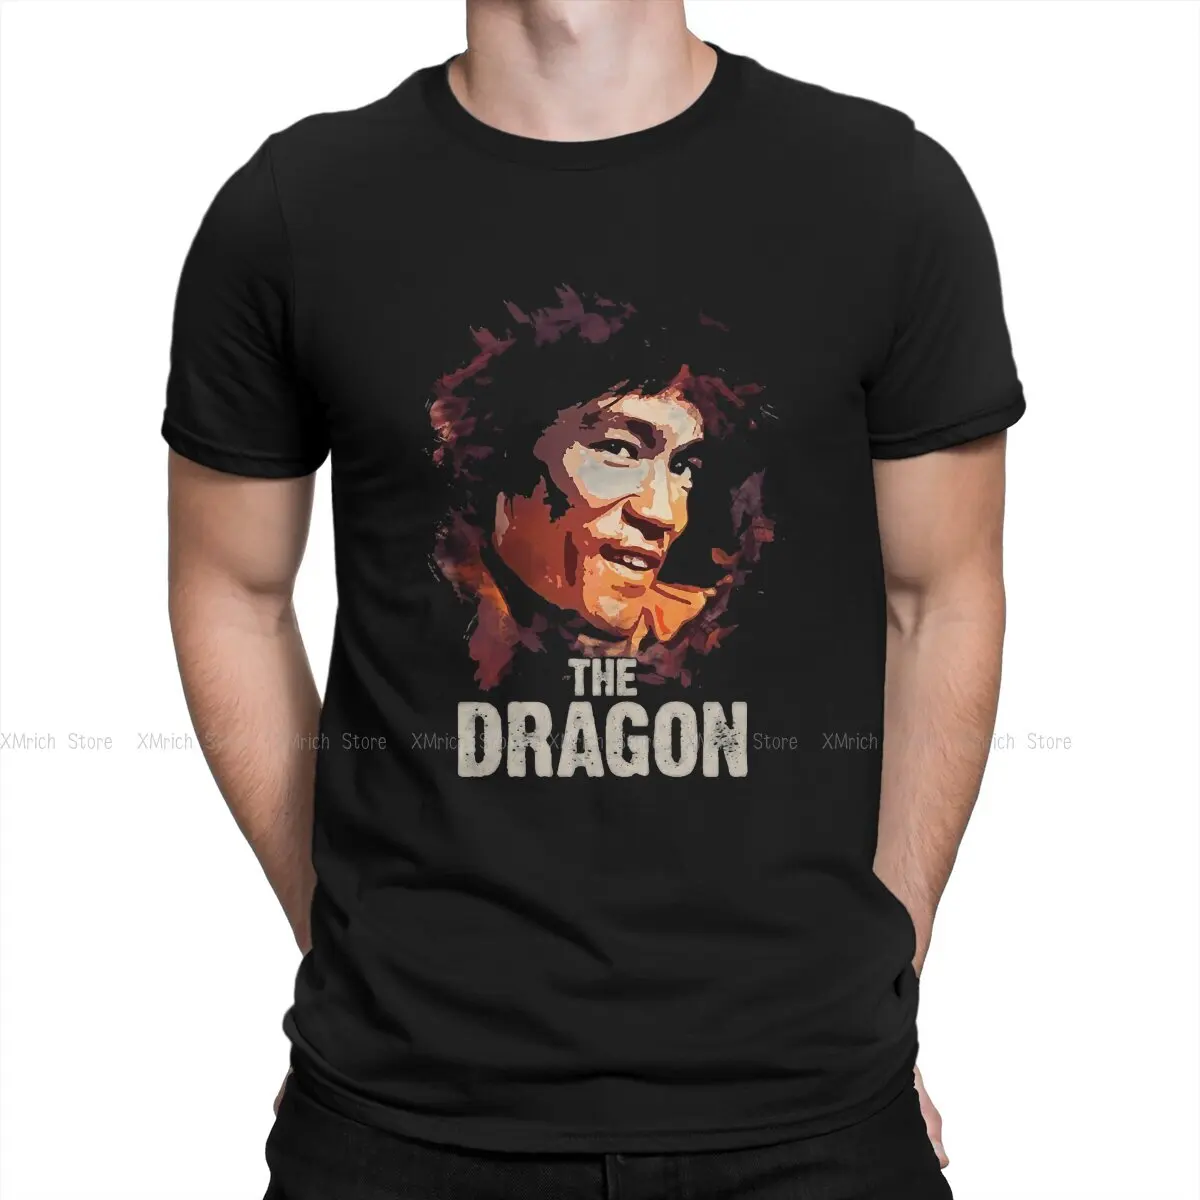 

Bruce Lee Martial Artist Creative TShirt for Men The Dragon Round Collar Pure Cotton T Shirt Distinctive Gift Clothes Tops